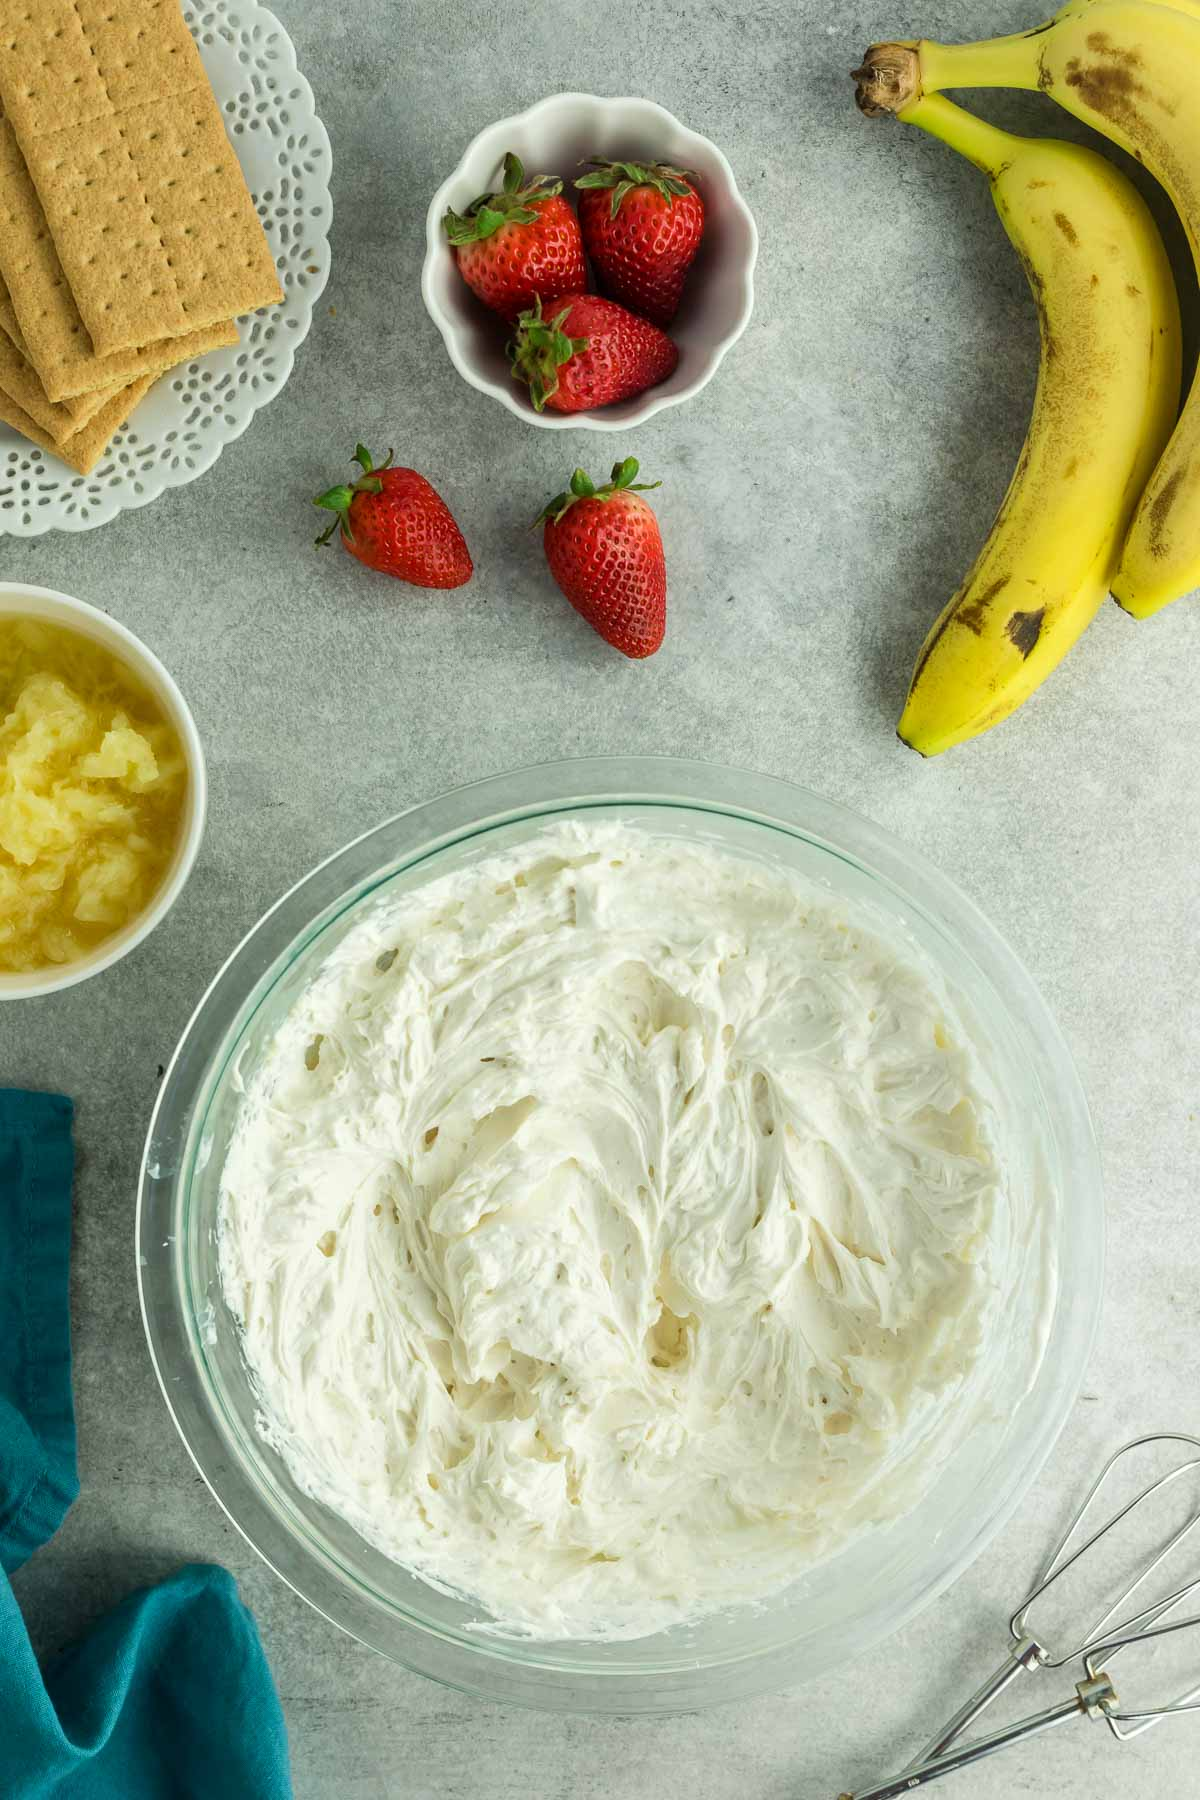 whipped cream and cream cheese mixture in bowl